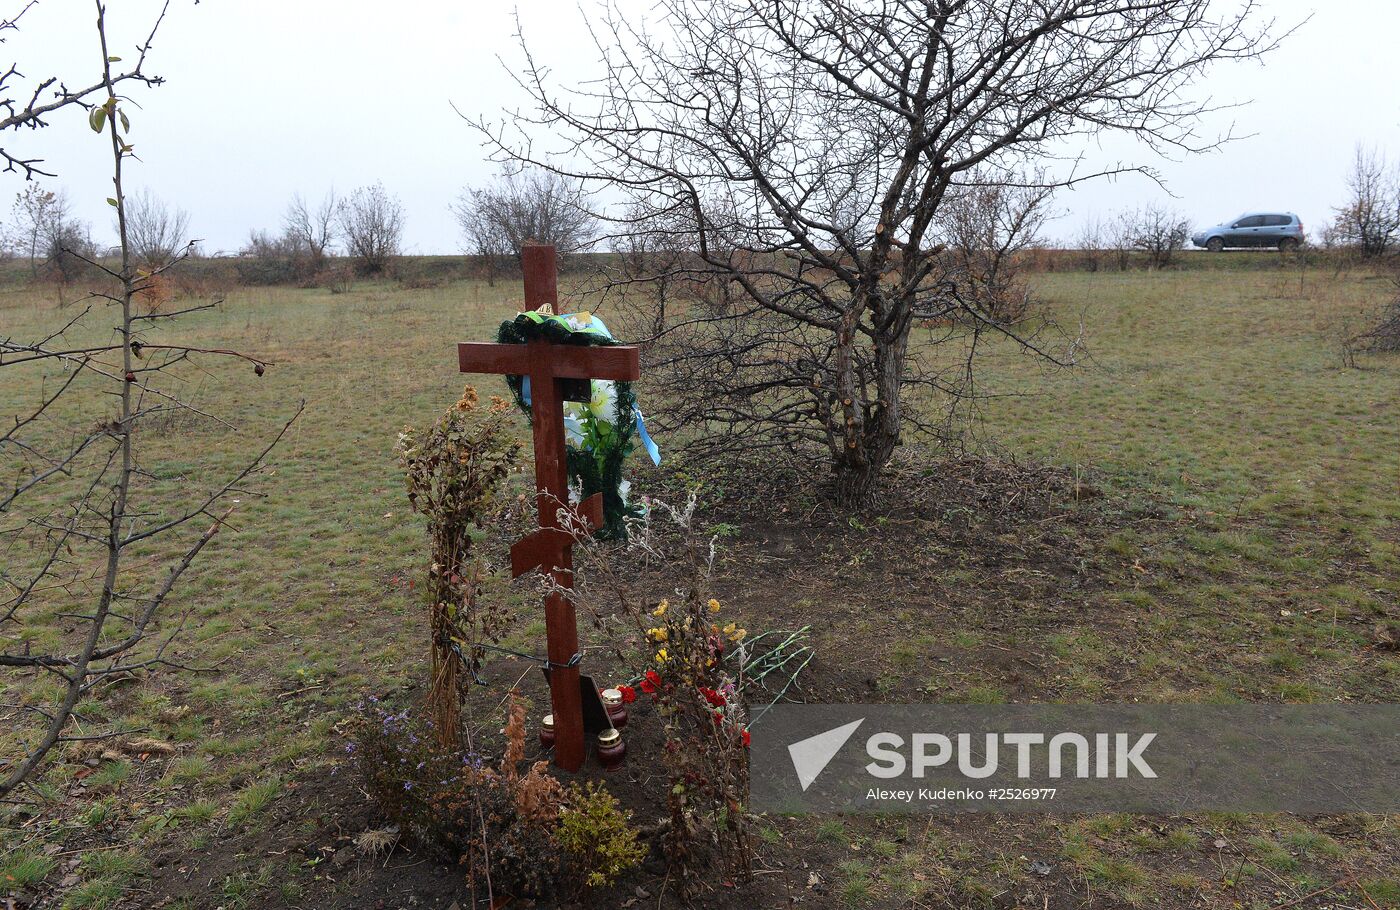 Aftermath of fighting in Donetsk Region